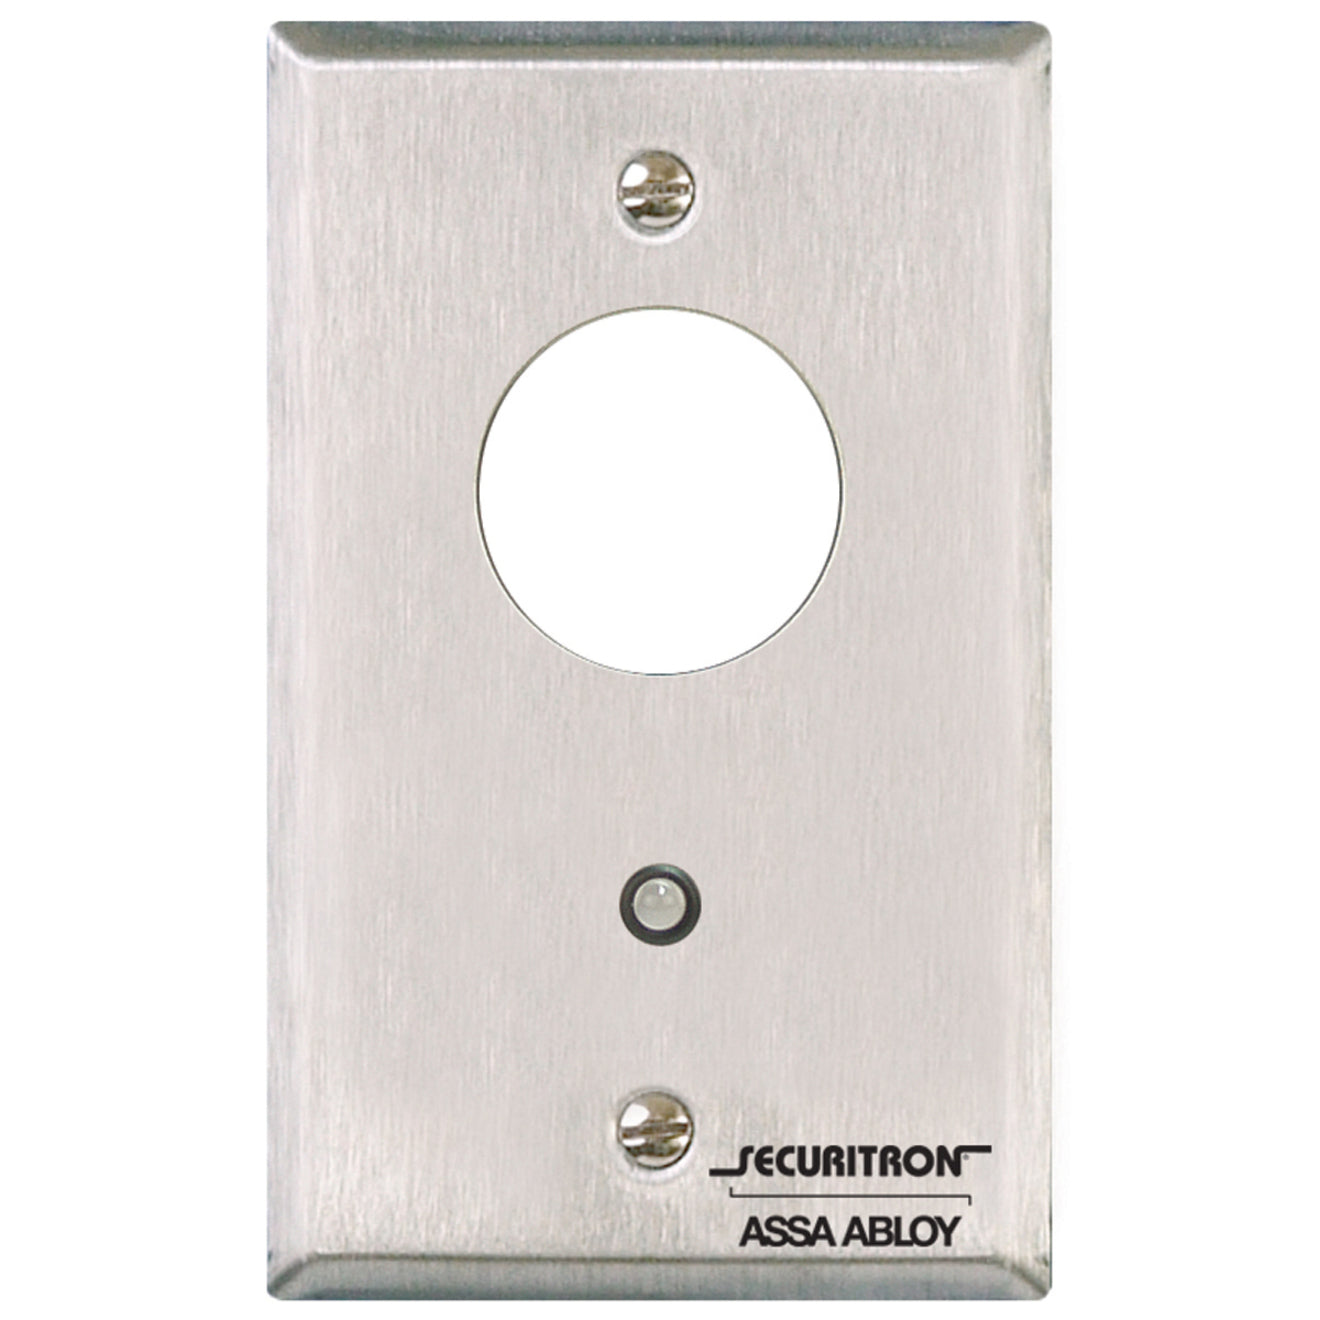 Securitron MKA Mortise Key Switch - Stainless Steel, 12/24 VDC LED, SPDT Plunger Switch